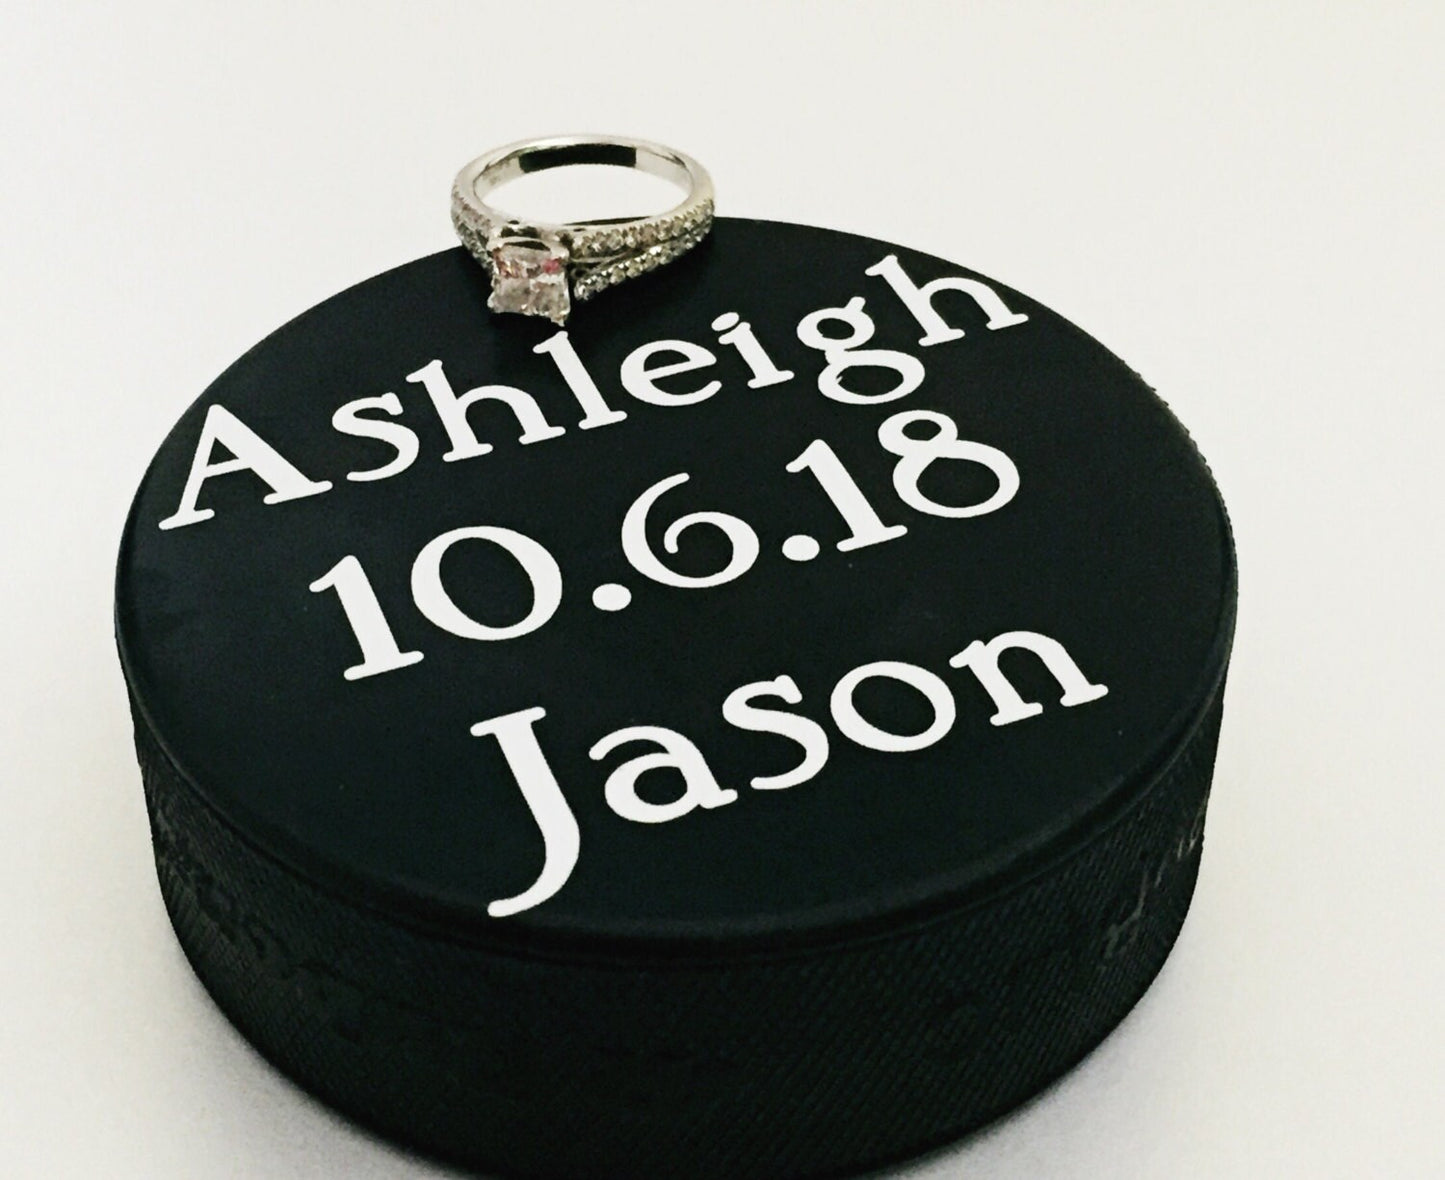 Hockey Save the Date | Unique Save the Date | Hockey Engagement | Hockey Wedding | Save the Date Prop | Engagement Prop | Sports Wedding